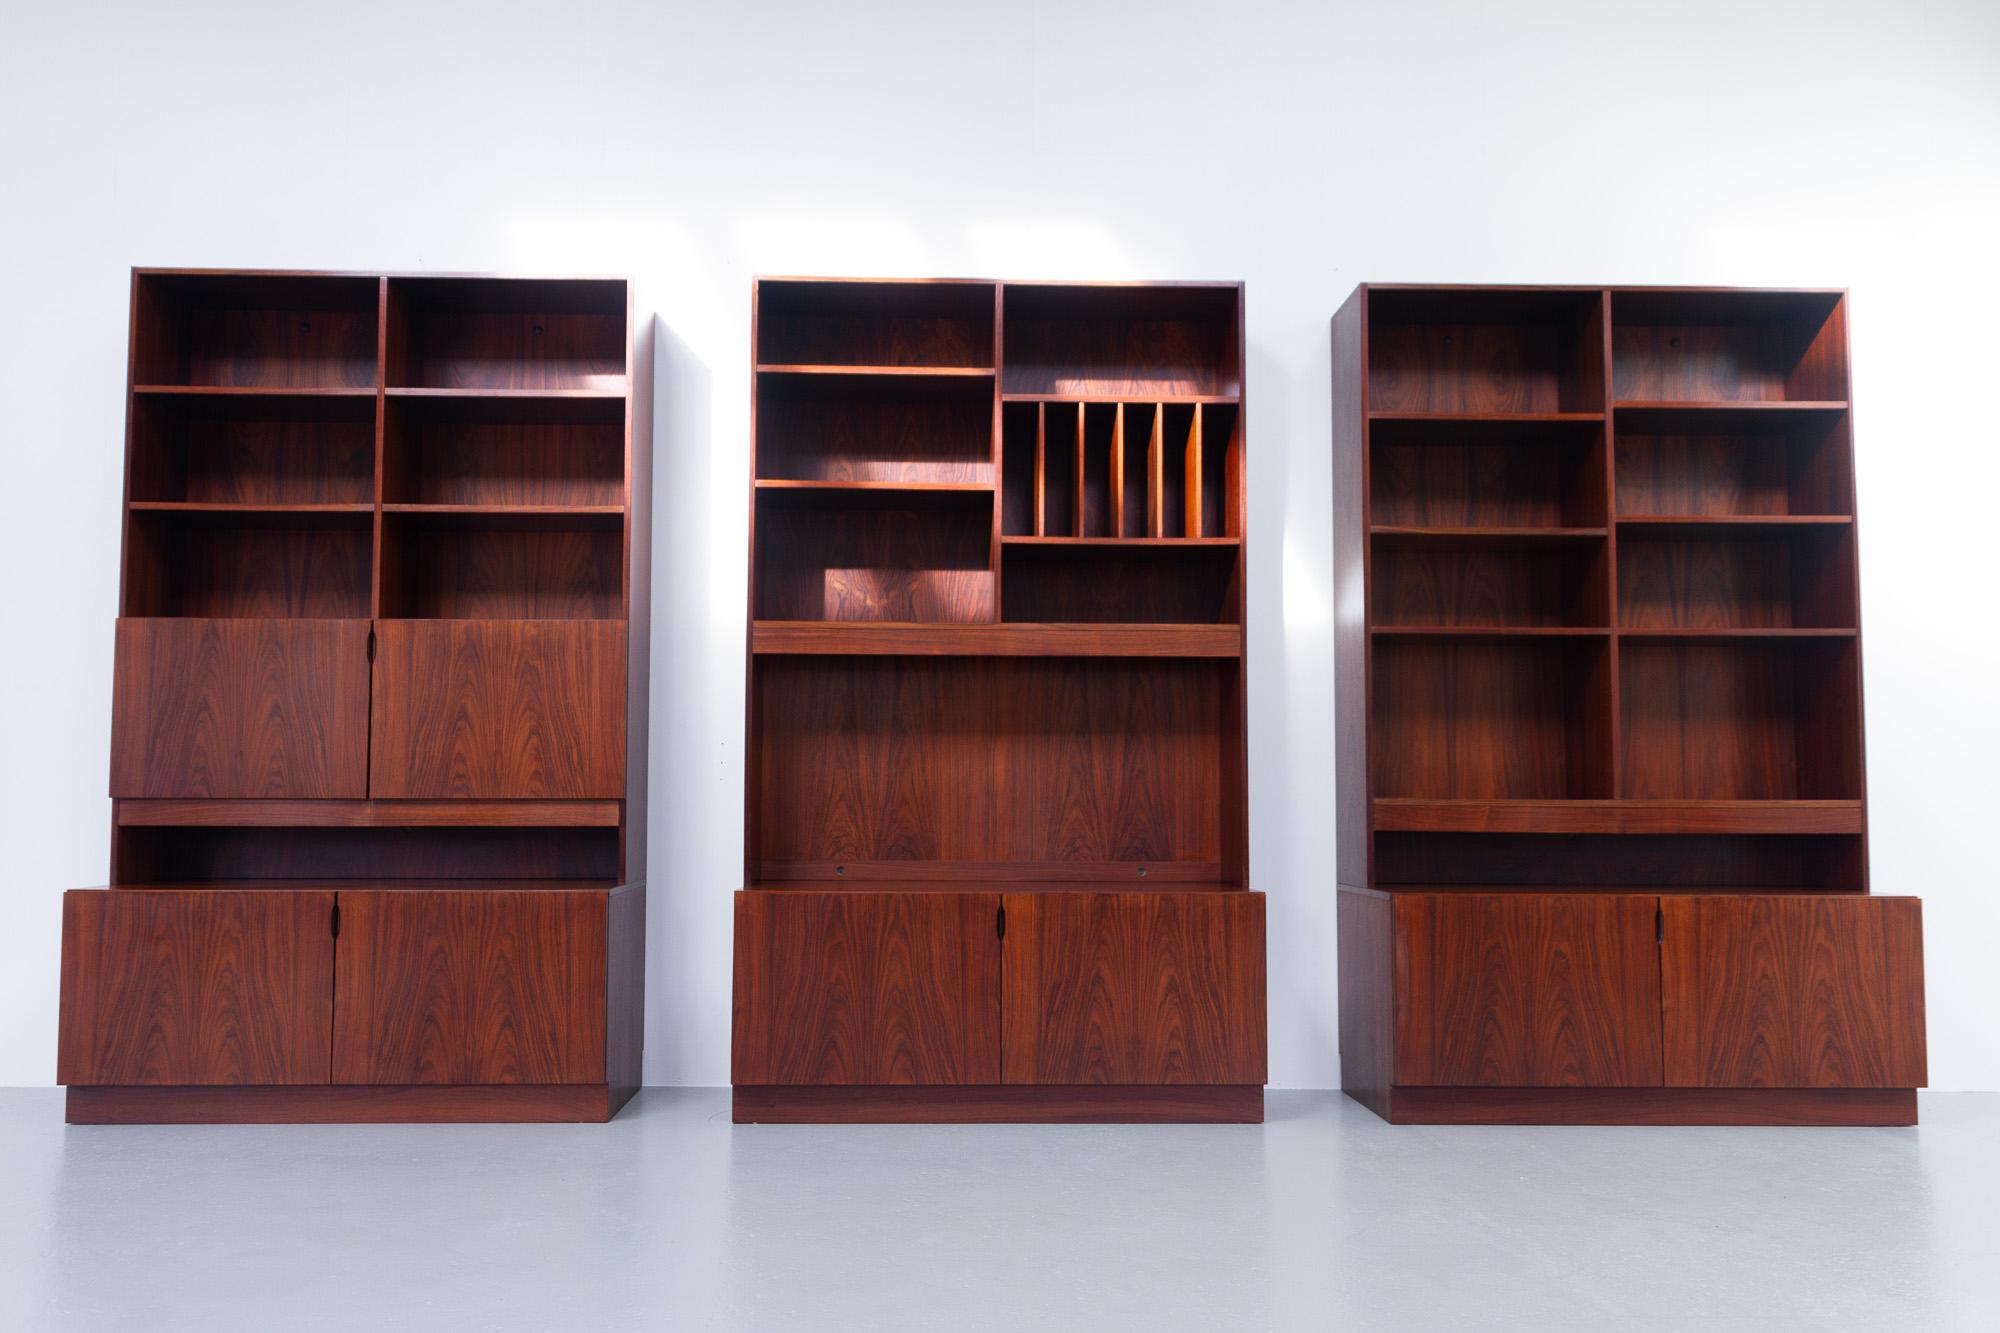 Vintage Danish large rosewood bookcase, 1960s.
Large and impressive Scandinavian Modern 3 bay bookcase in stunning Rosewood veneer. This three part Danish library with plenty of storage space can be used as one large unit or three separate units.